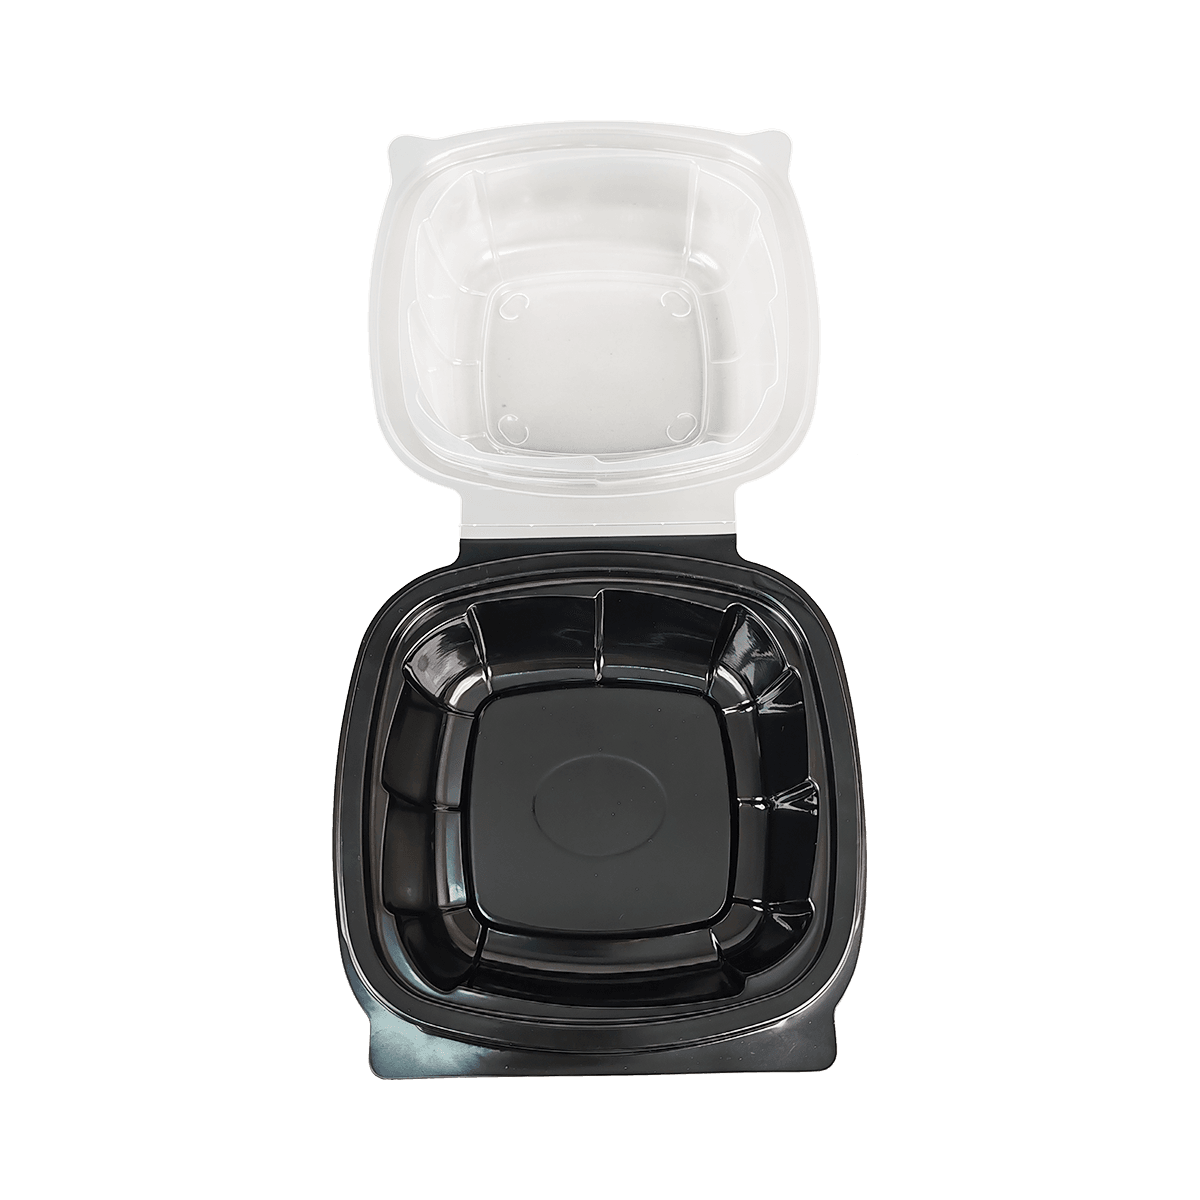 ZK-PP-037 Reusable Black PP Packaging Containers Suitable For Travel, Camping, Picnics